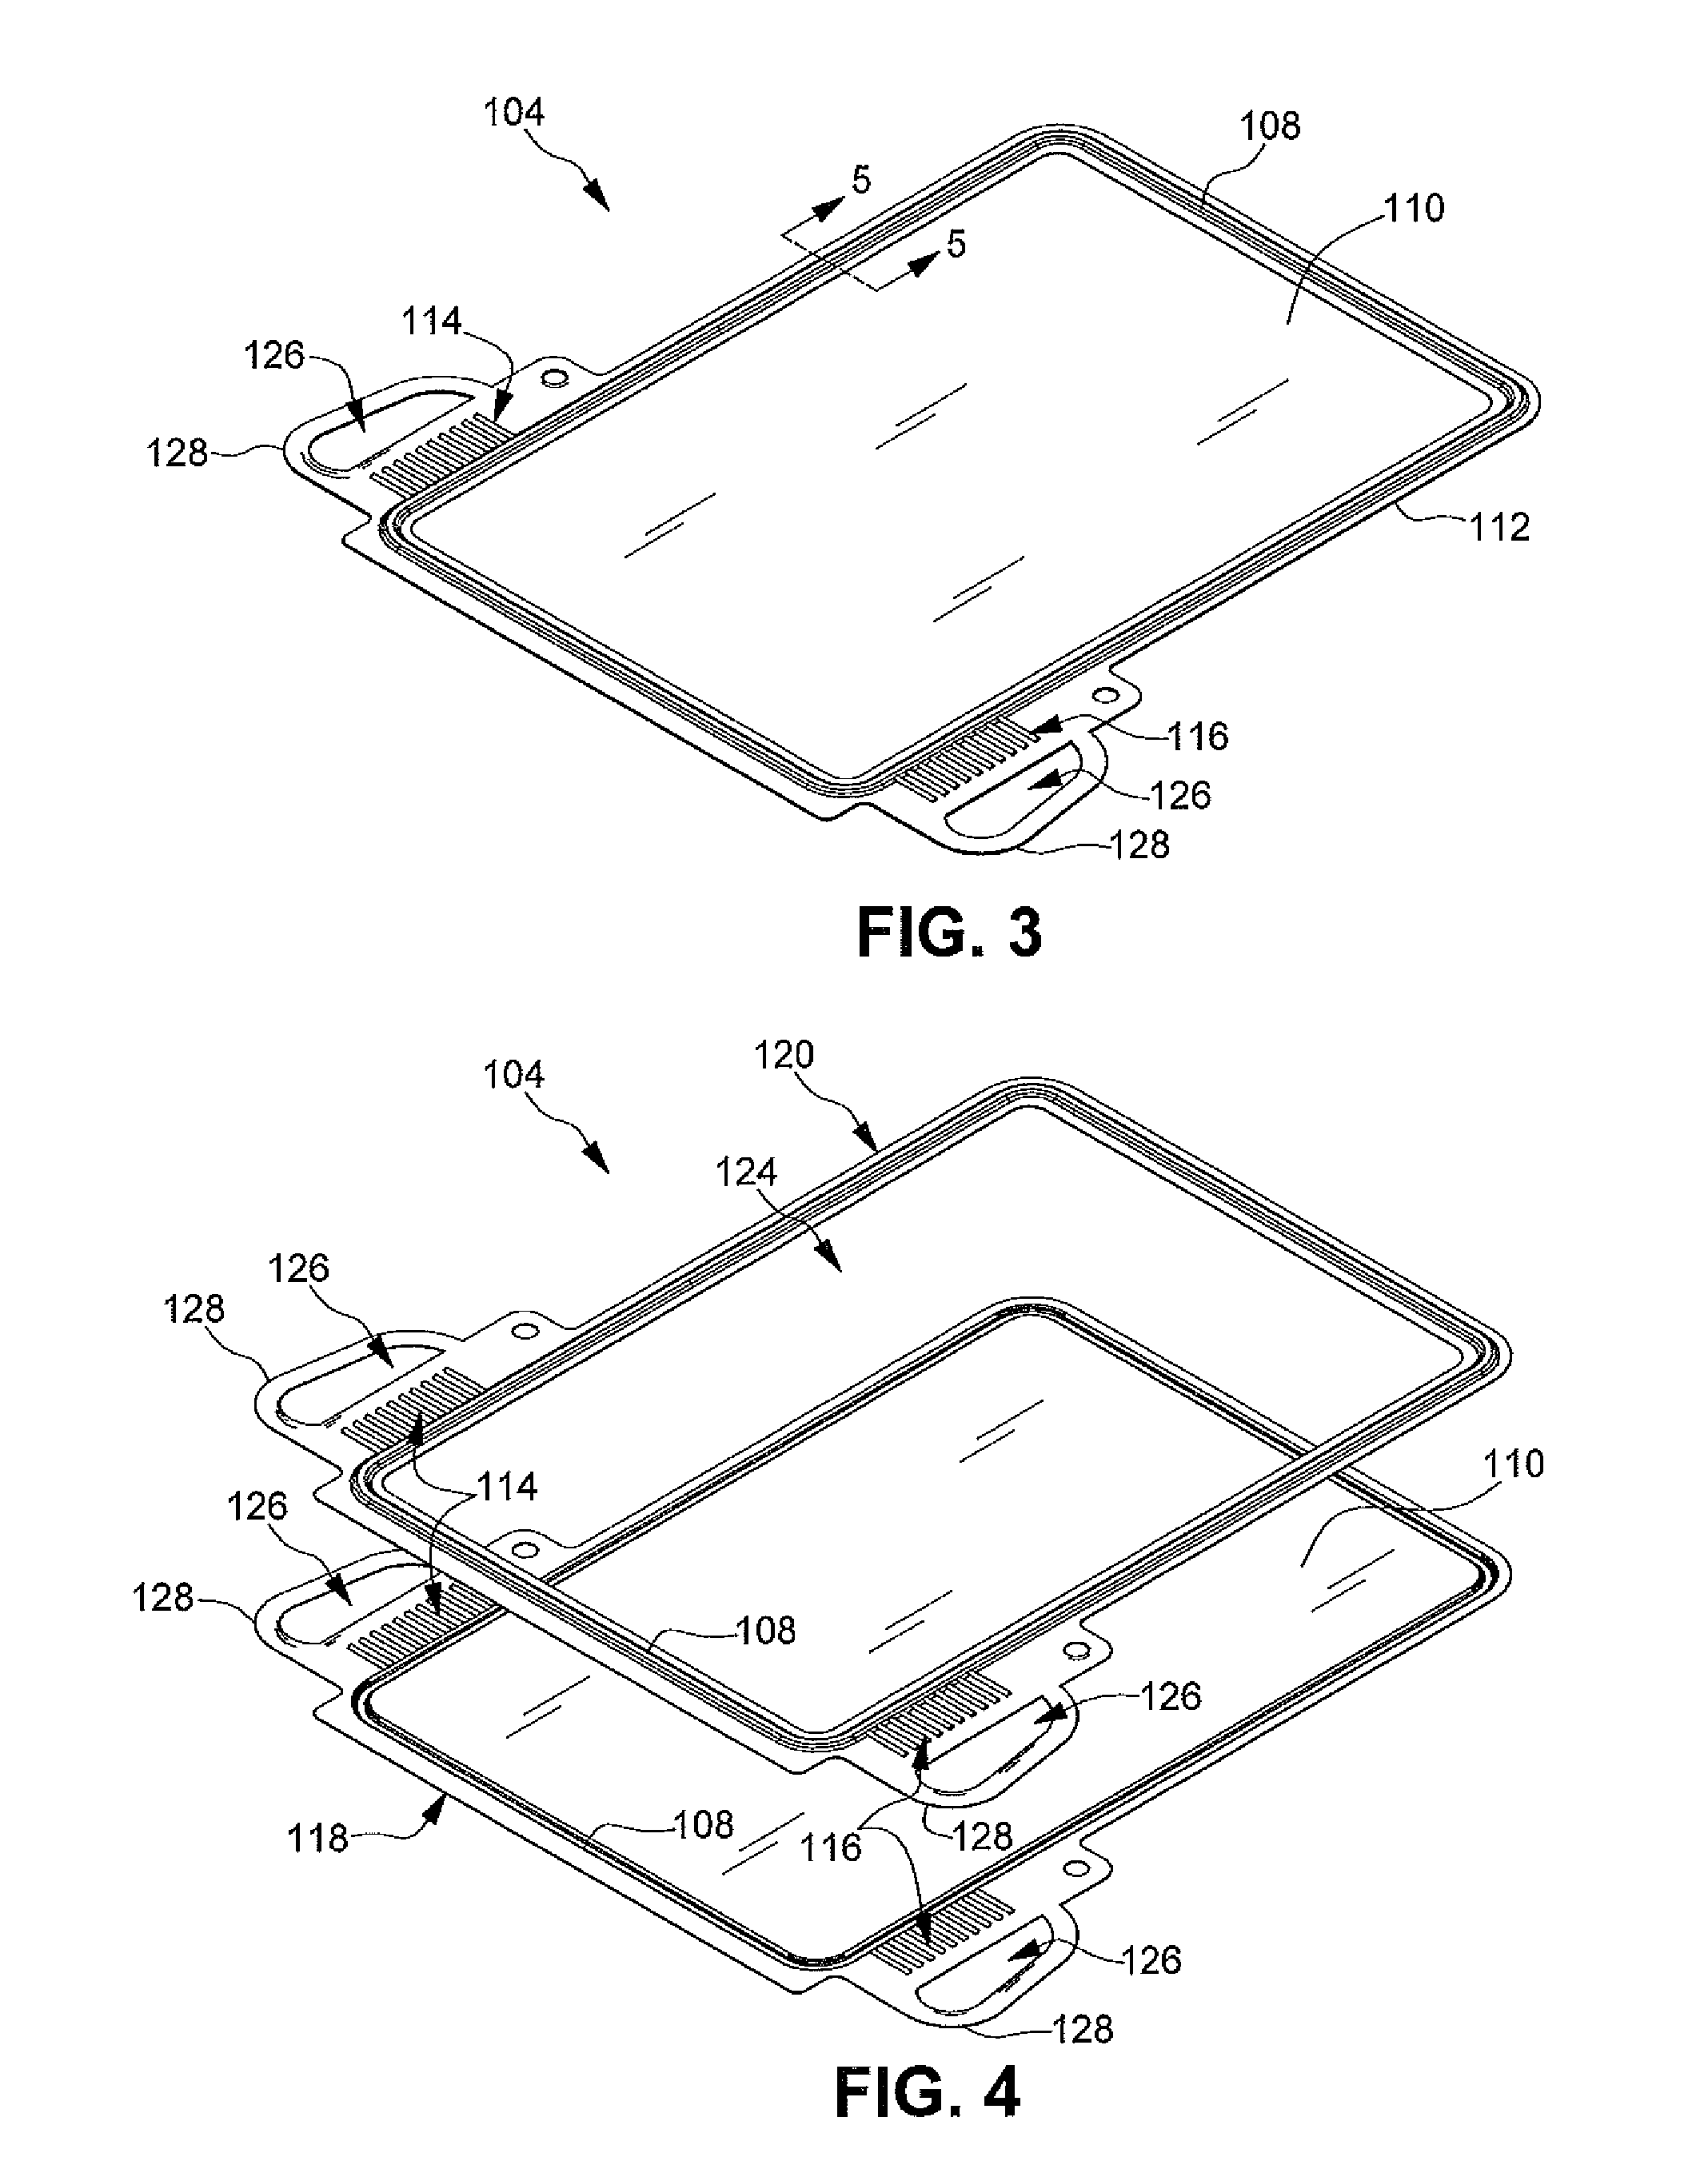 Cooling plate for lithium-ion battery pack